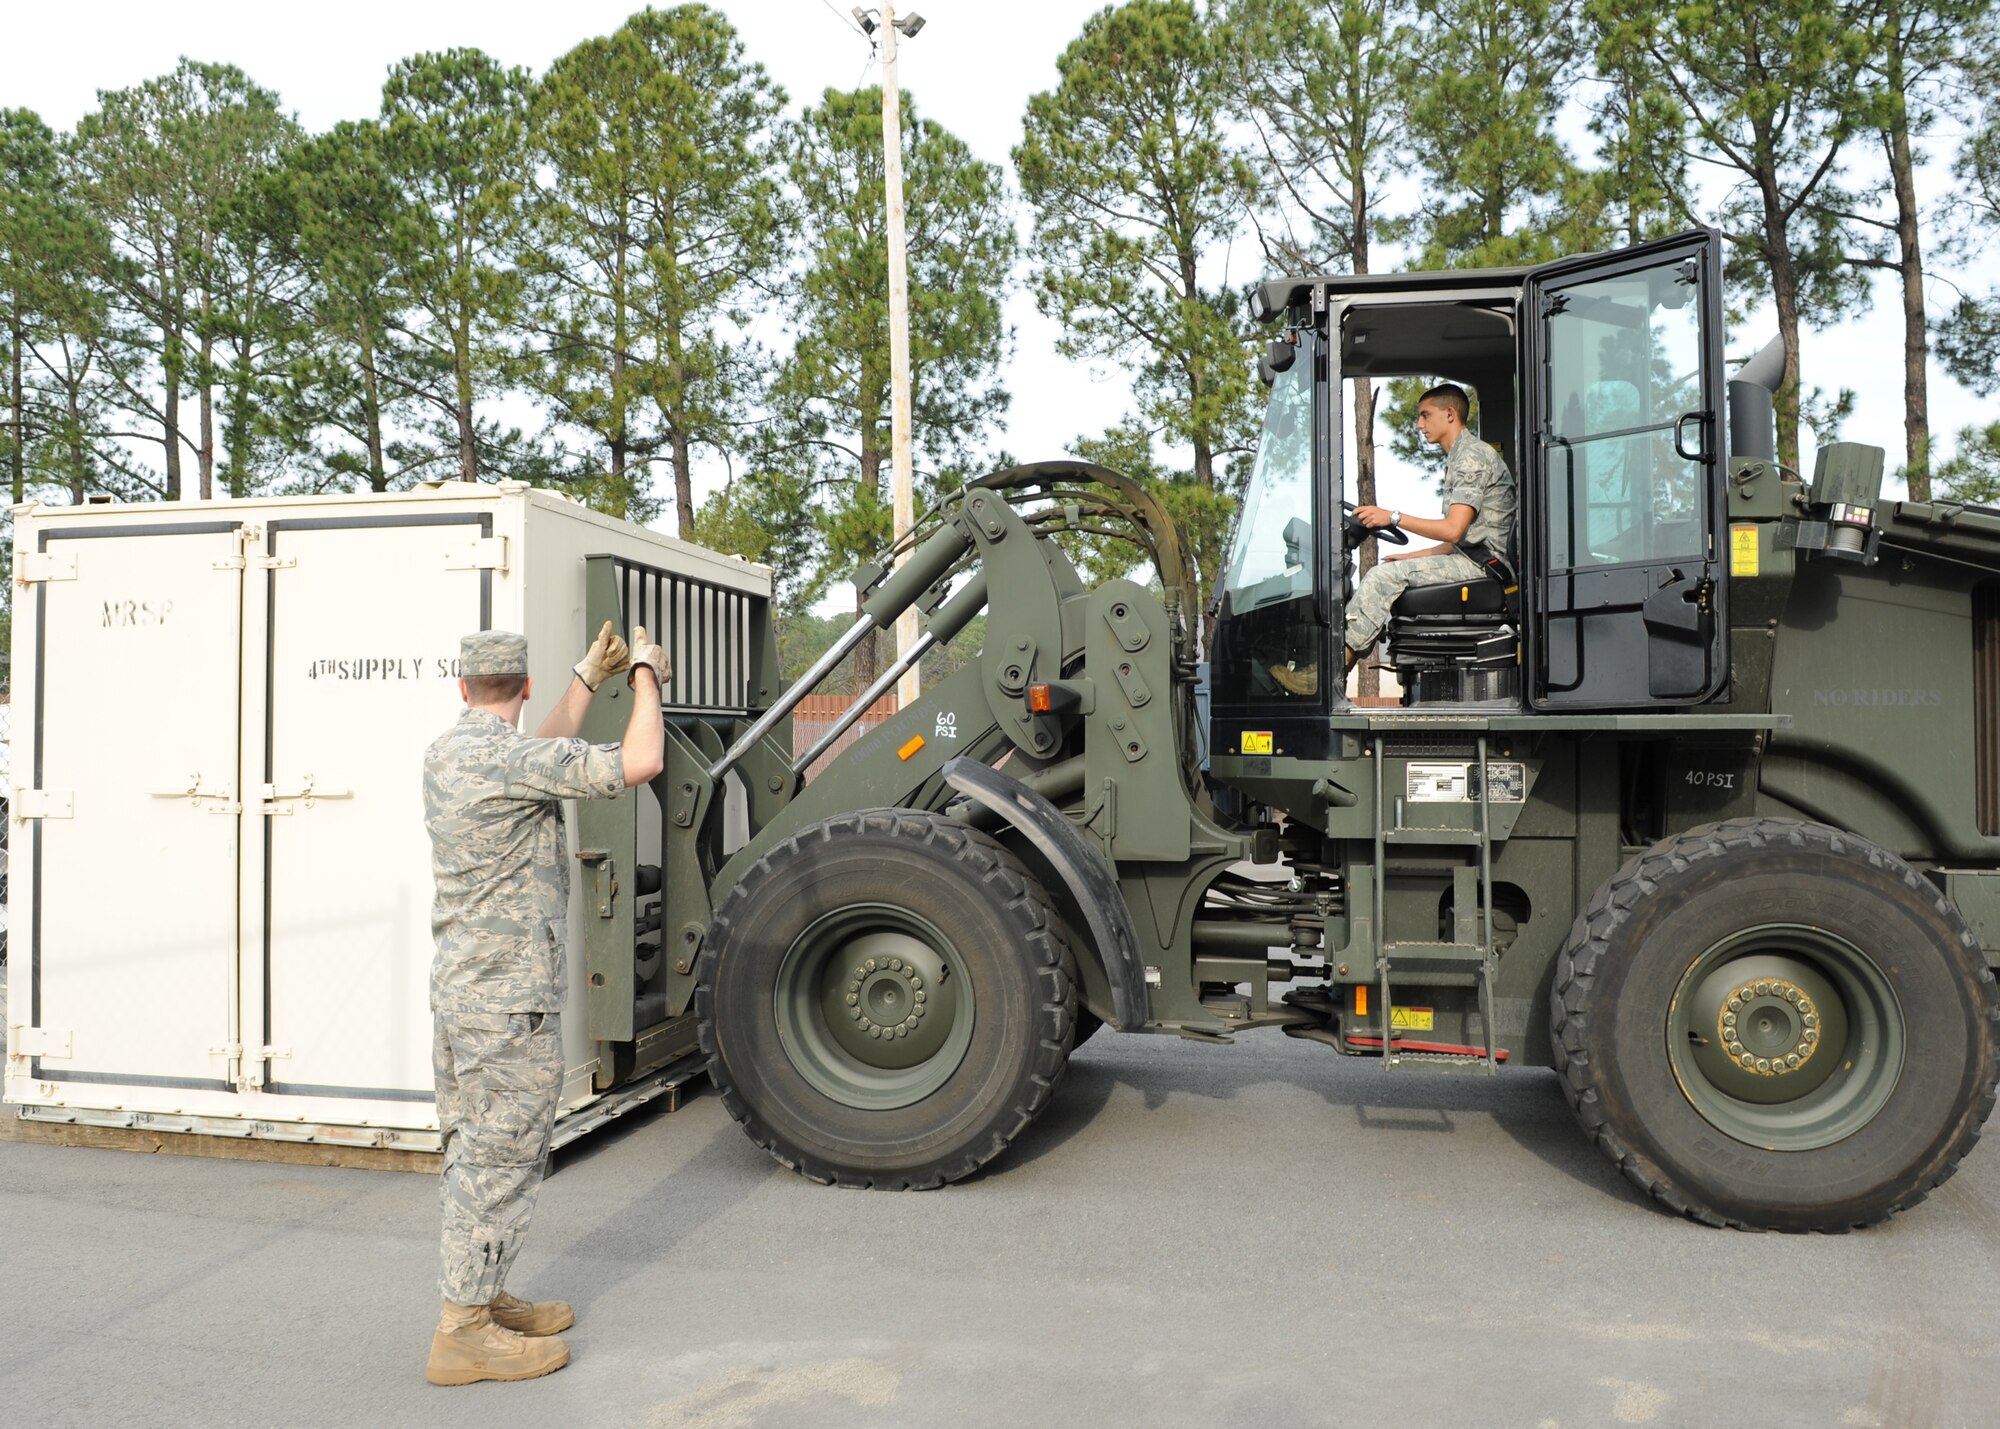 Airman 1st Class Zachary Mayo directs Airman 1st Class Anthony Padilla, both from the Combat Vehicle Operations Flight here, in backing up the forklift on Seymour Johnson Air Force Base, N.C., Feb. 11, 2009. Airman Mayo acts as eyes for Airman Padilla who cannot see the forks below. (U.S. Air Force photo by Airman 1st Class Whitney Stanfield)
